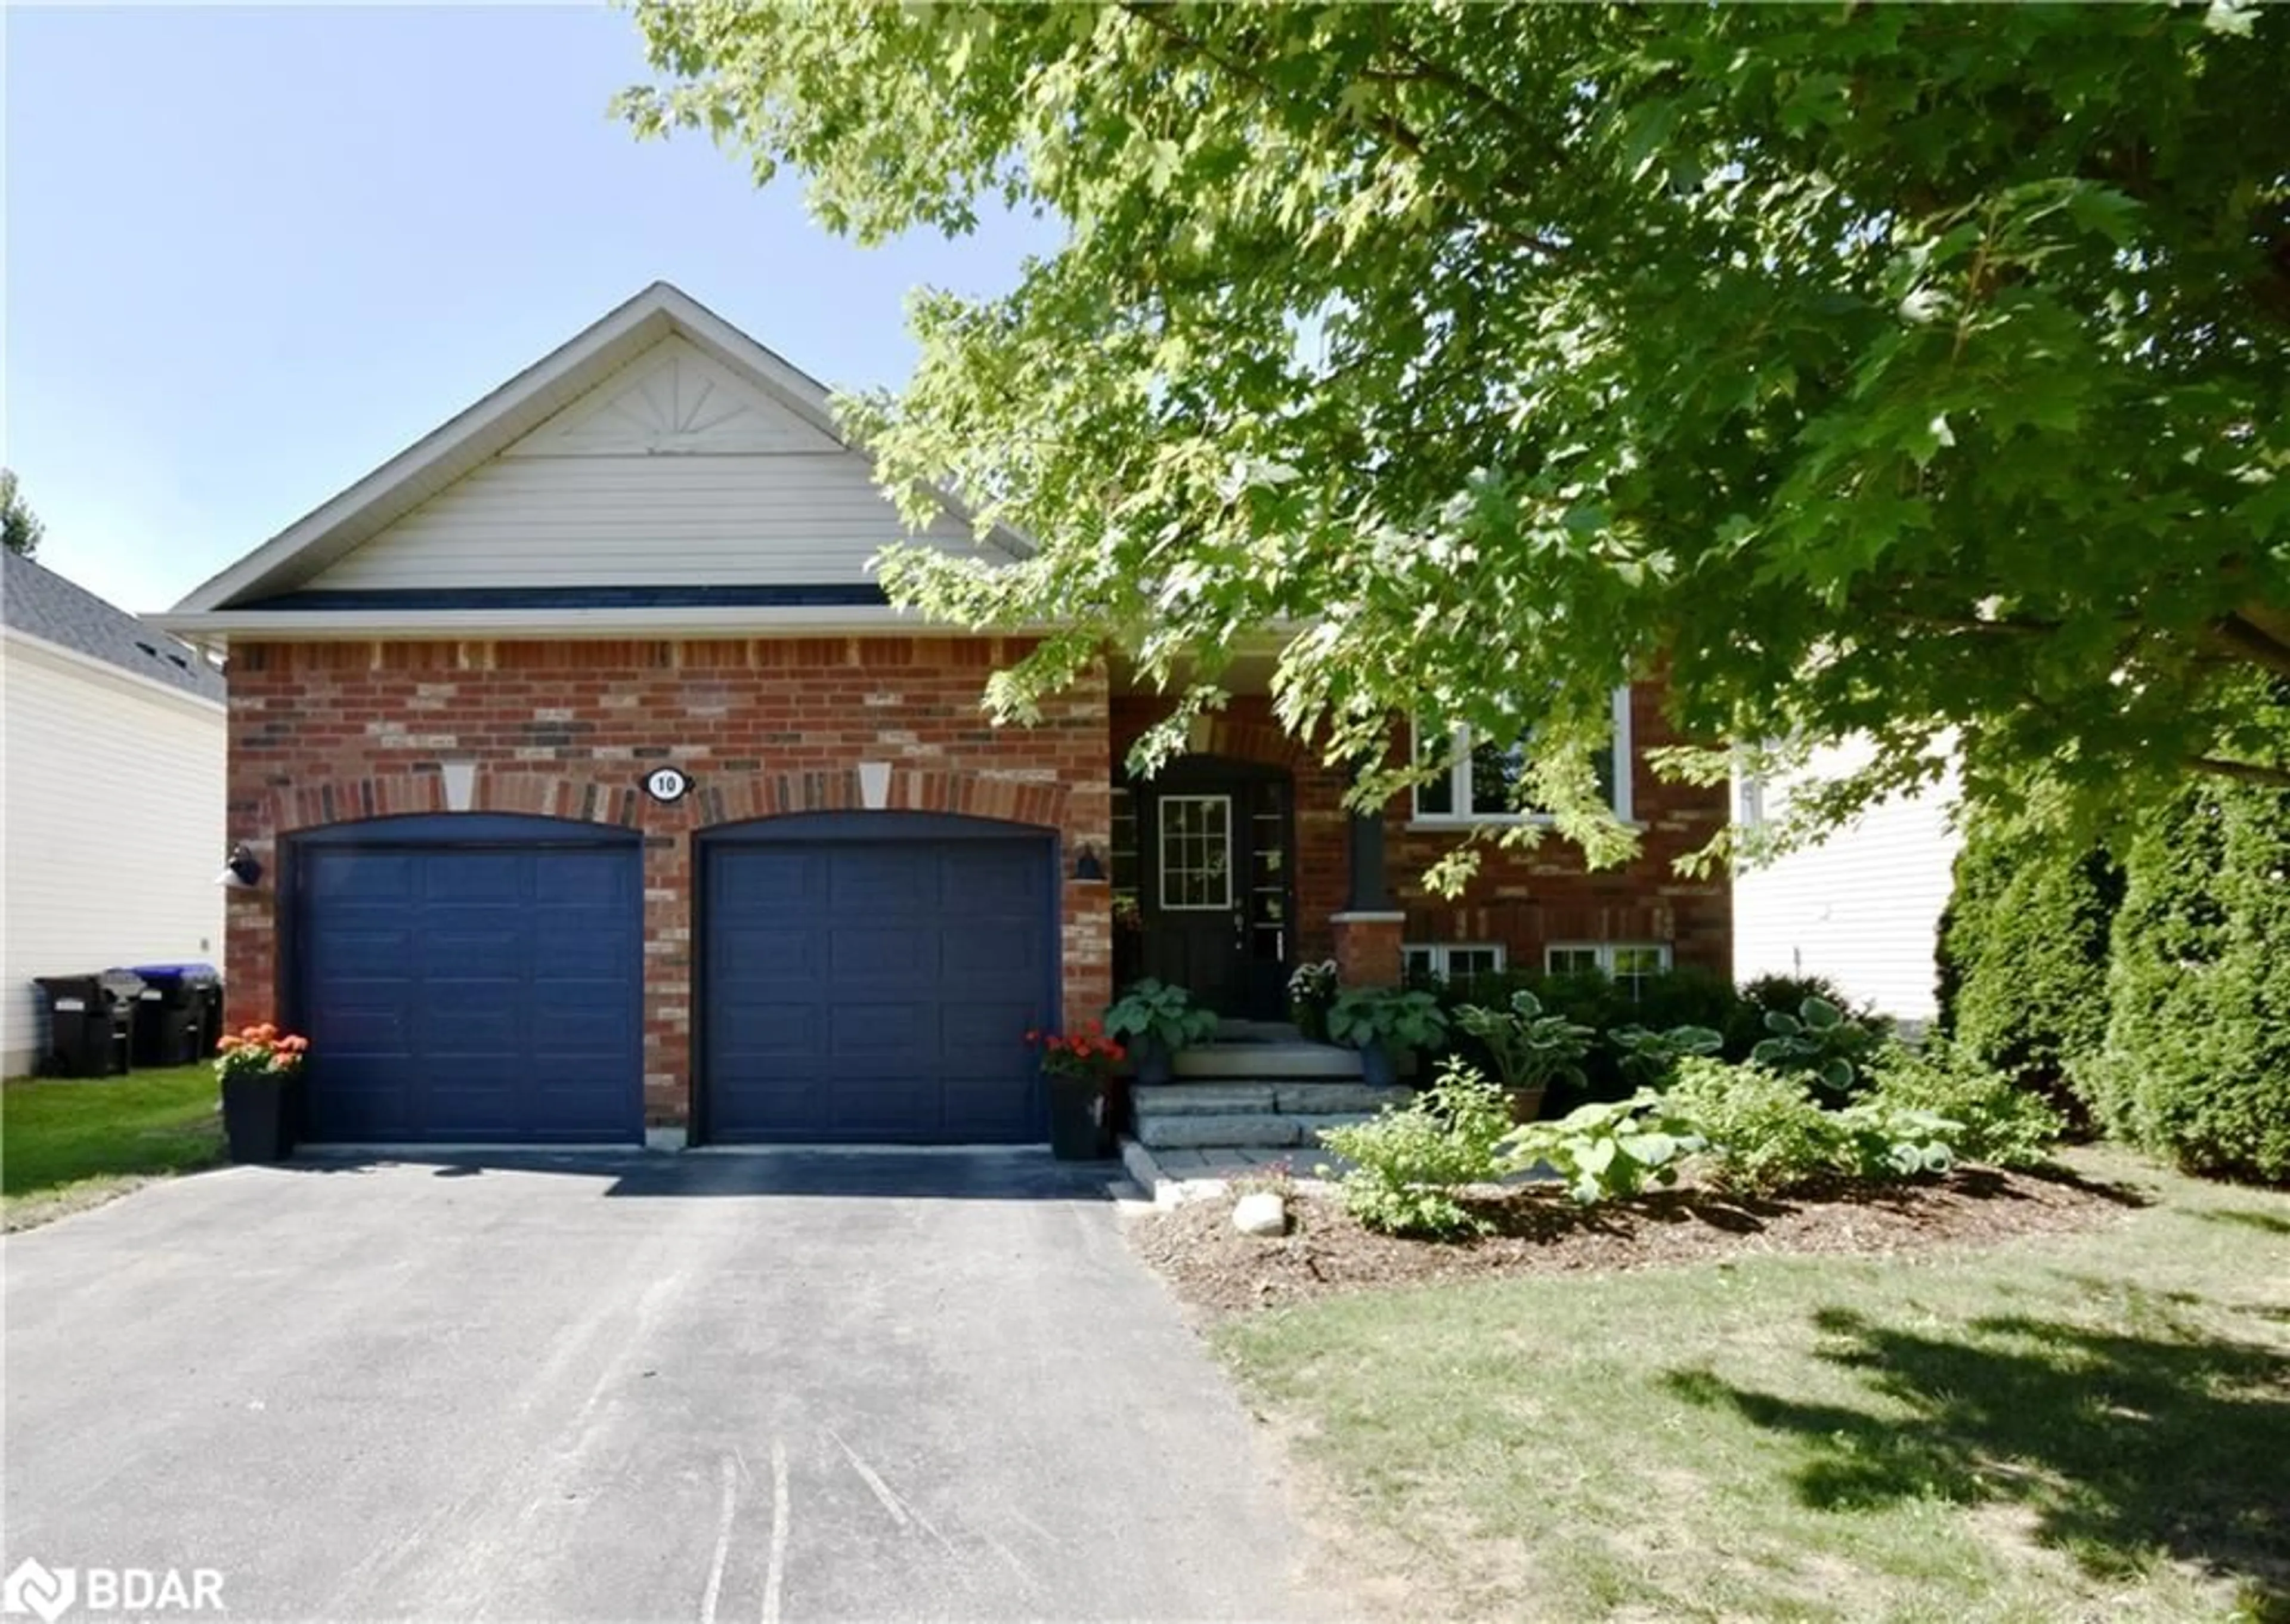 Home with brick exterior material for 10 Princess Point Dr, Wasaga Beach Ontario L9Z 3C3